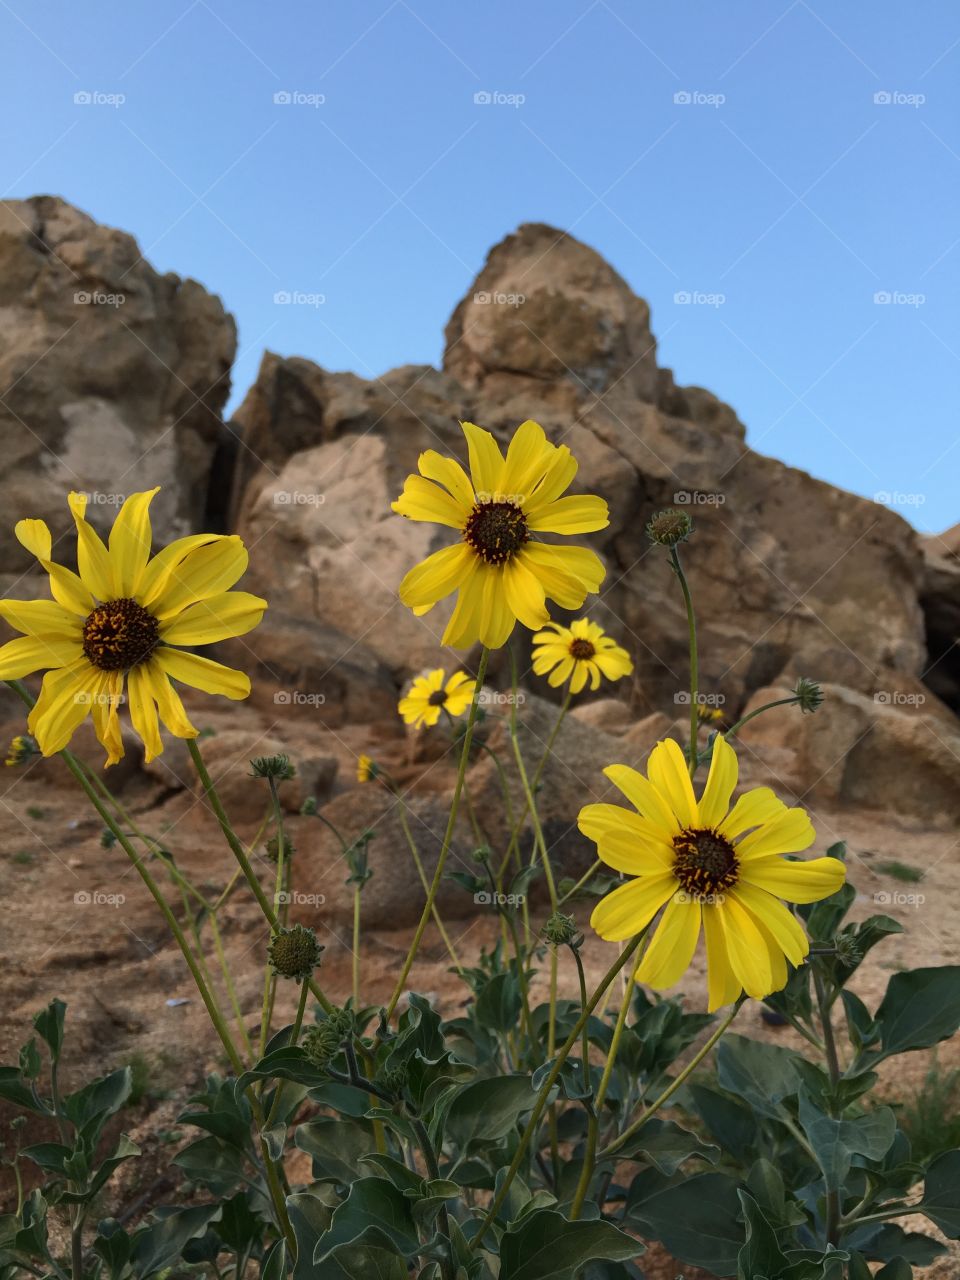 Daisies on hill with large rocks